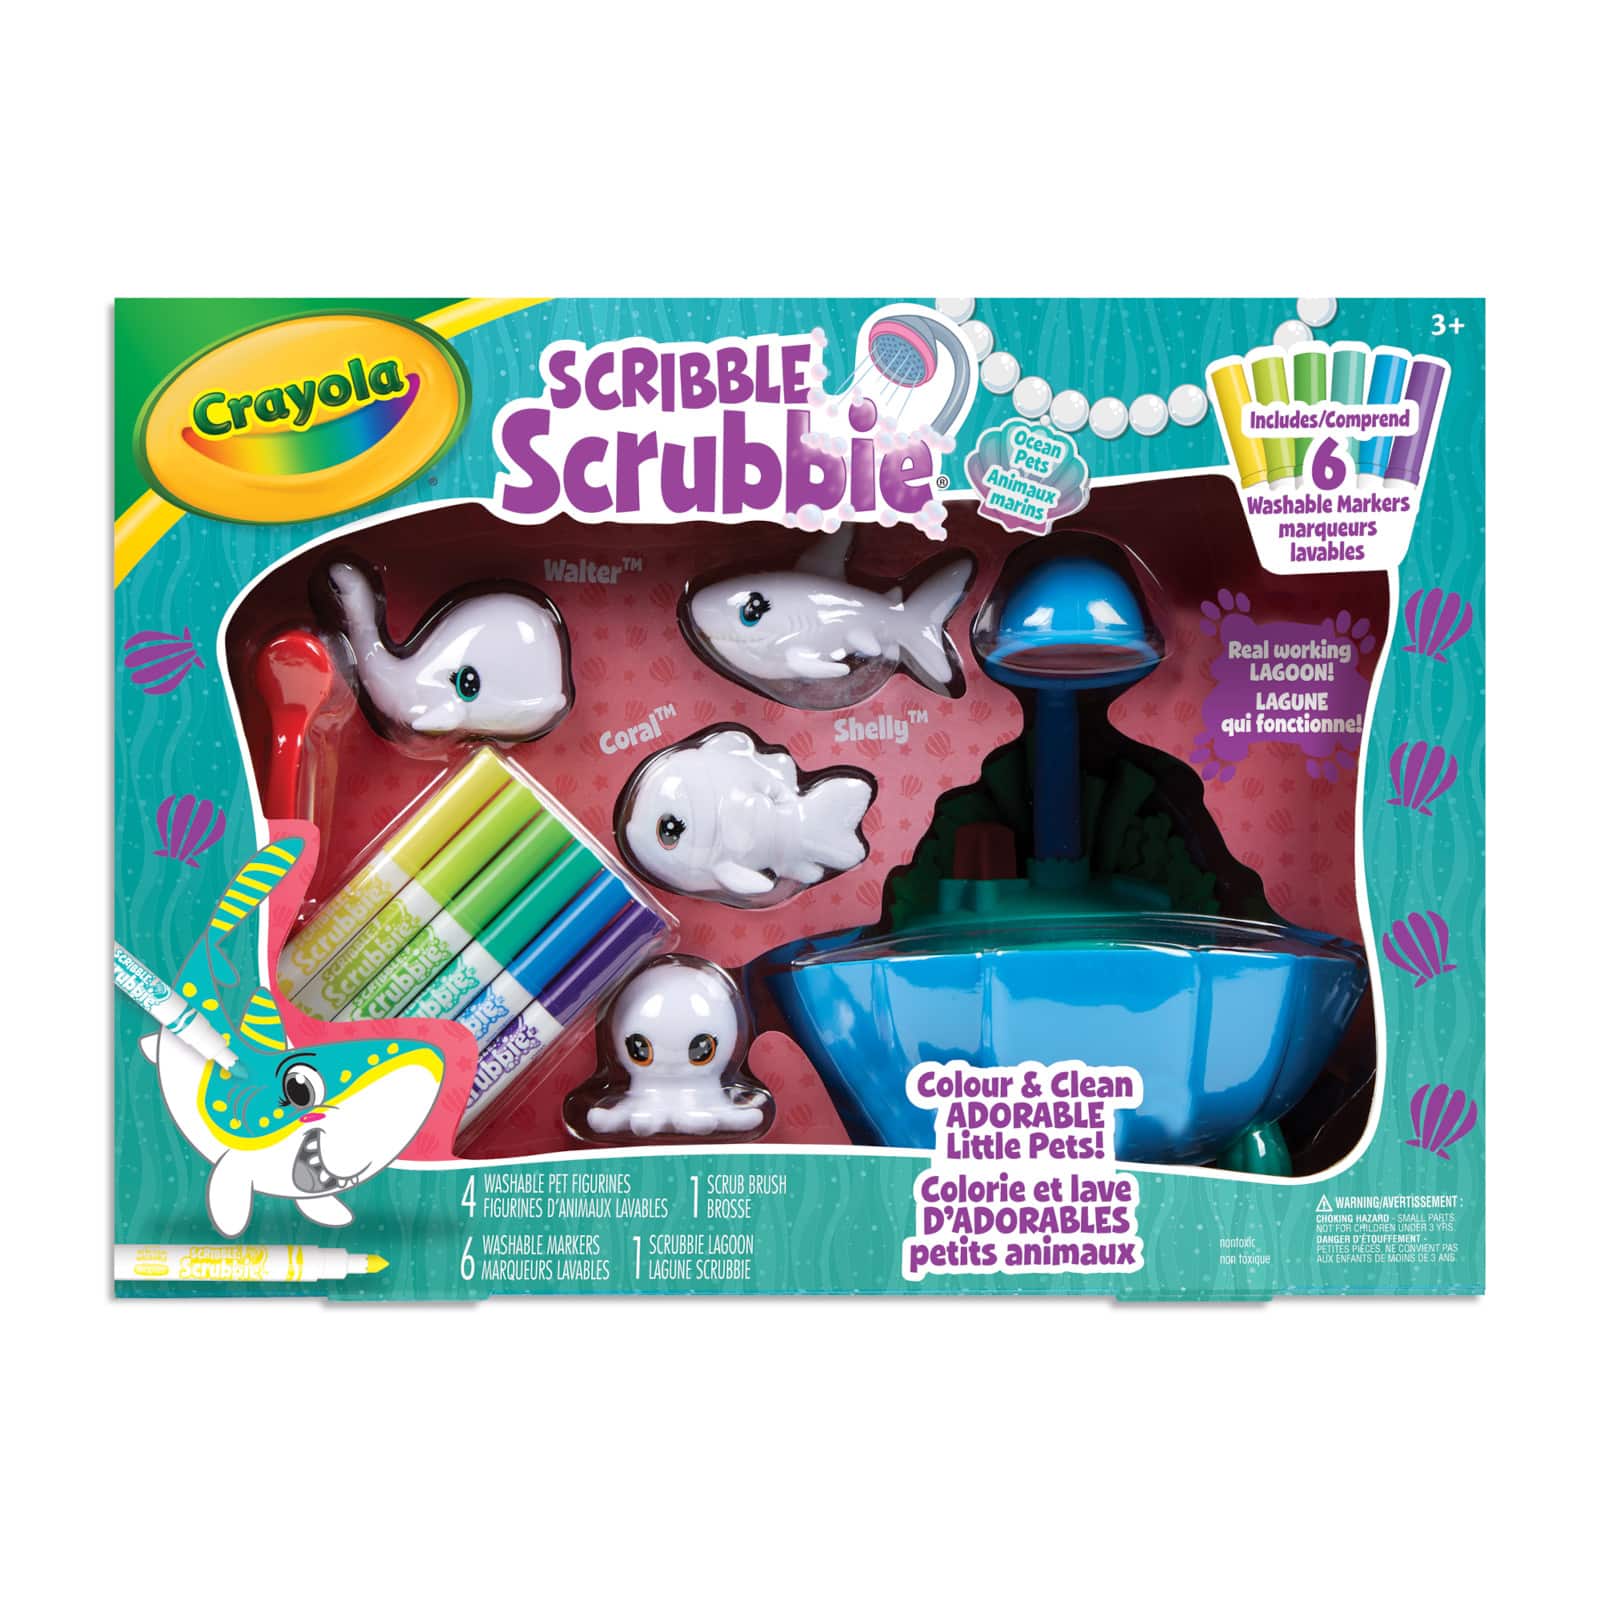 Crayola Scribble Scrubbies  Get an Inside Look at Over 150 of the